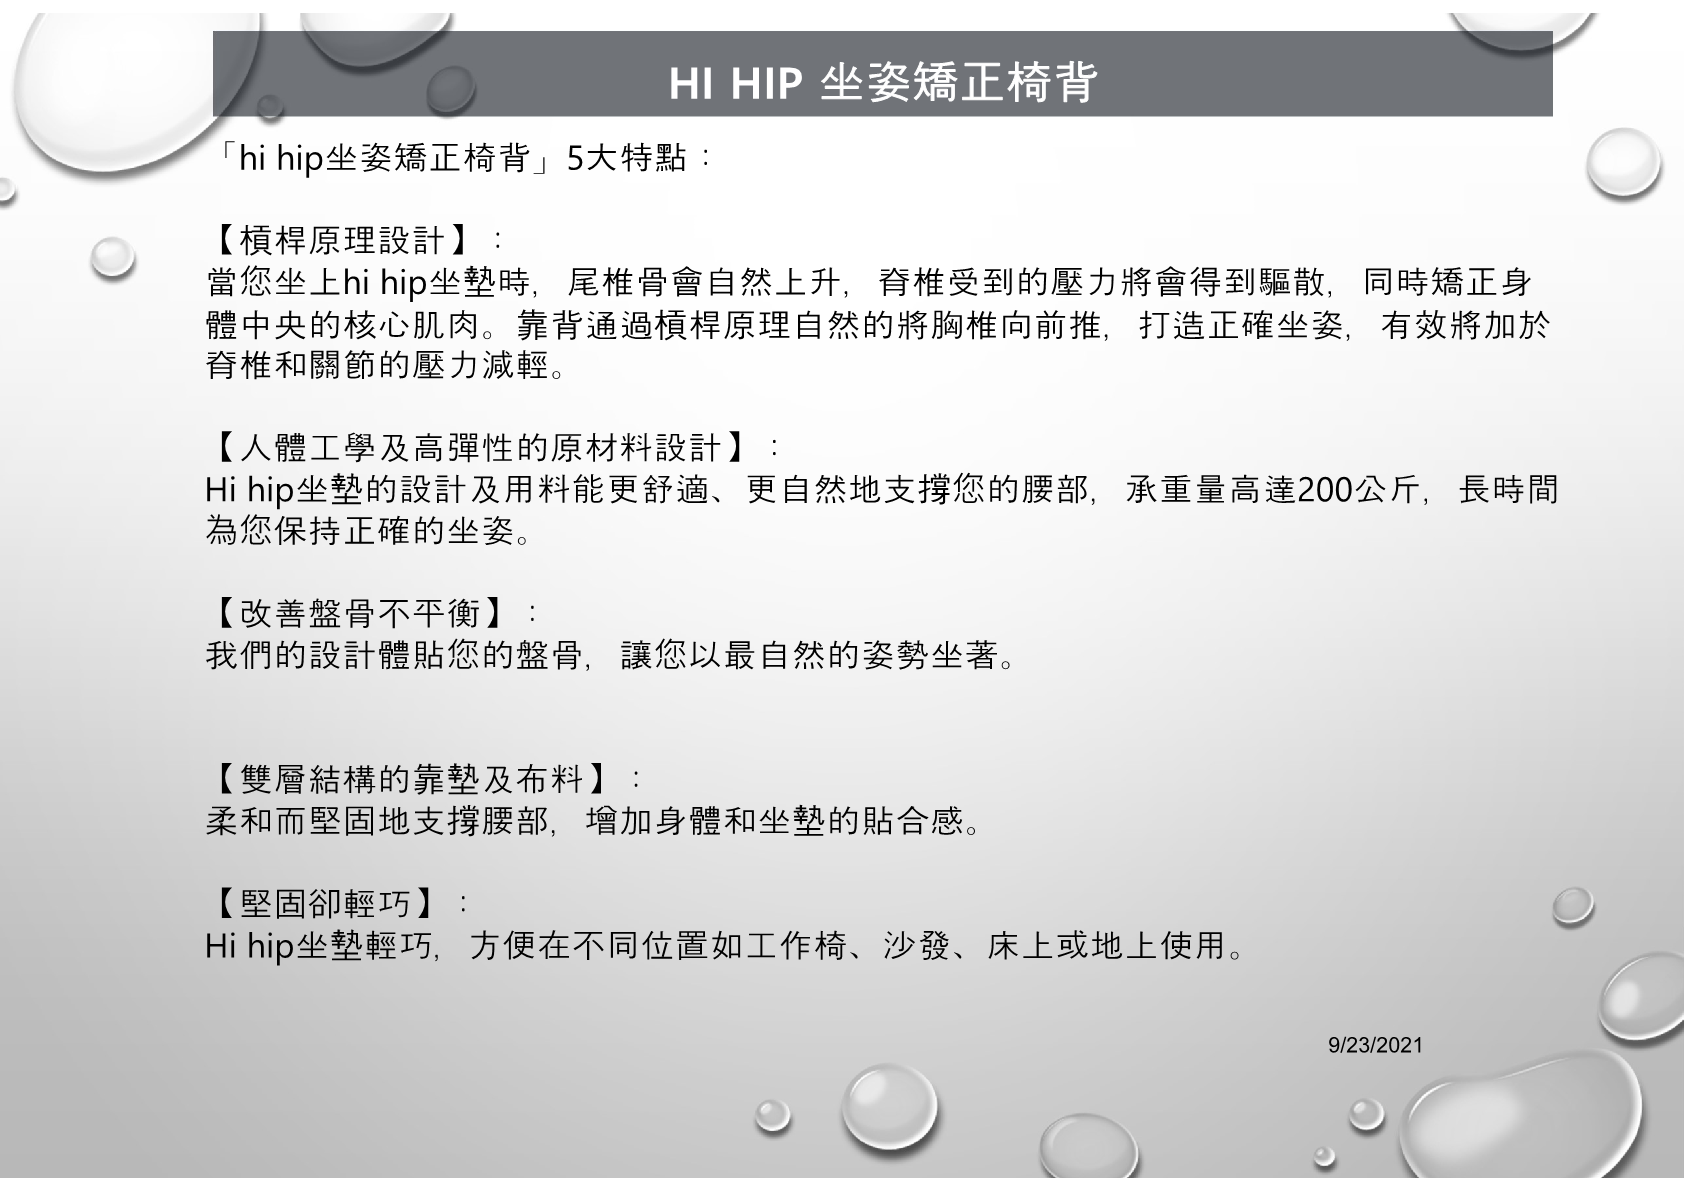 hi-hip-custion-chair-product-introduction4.png